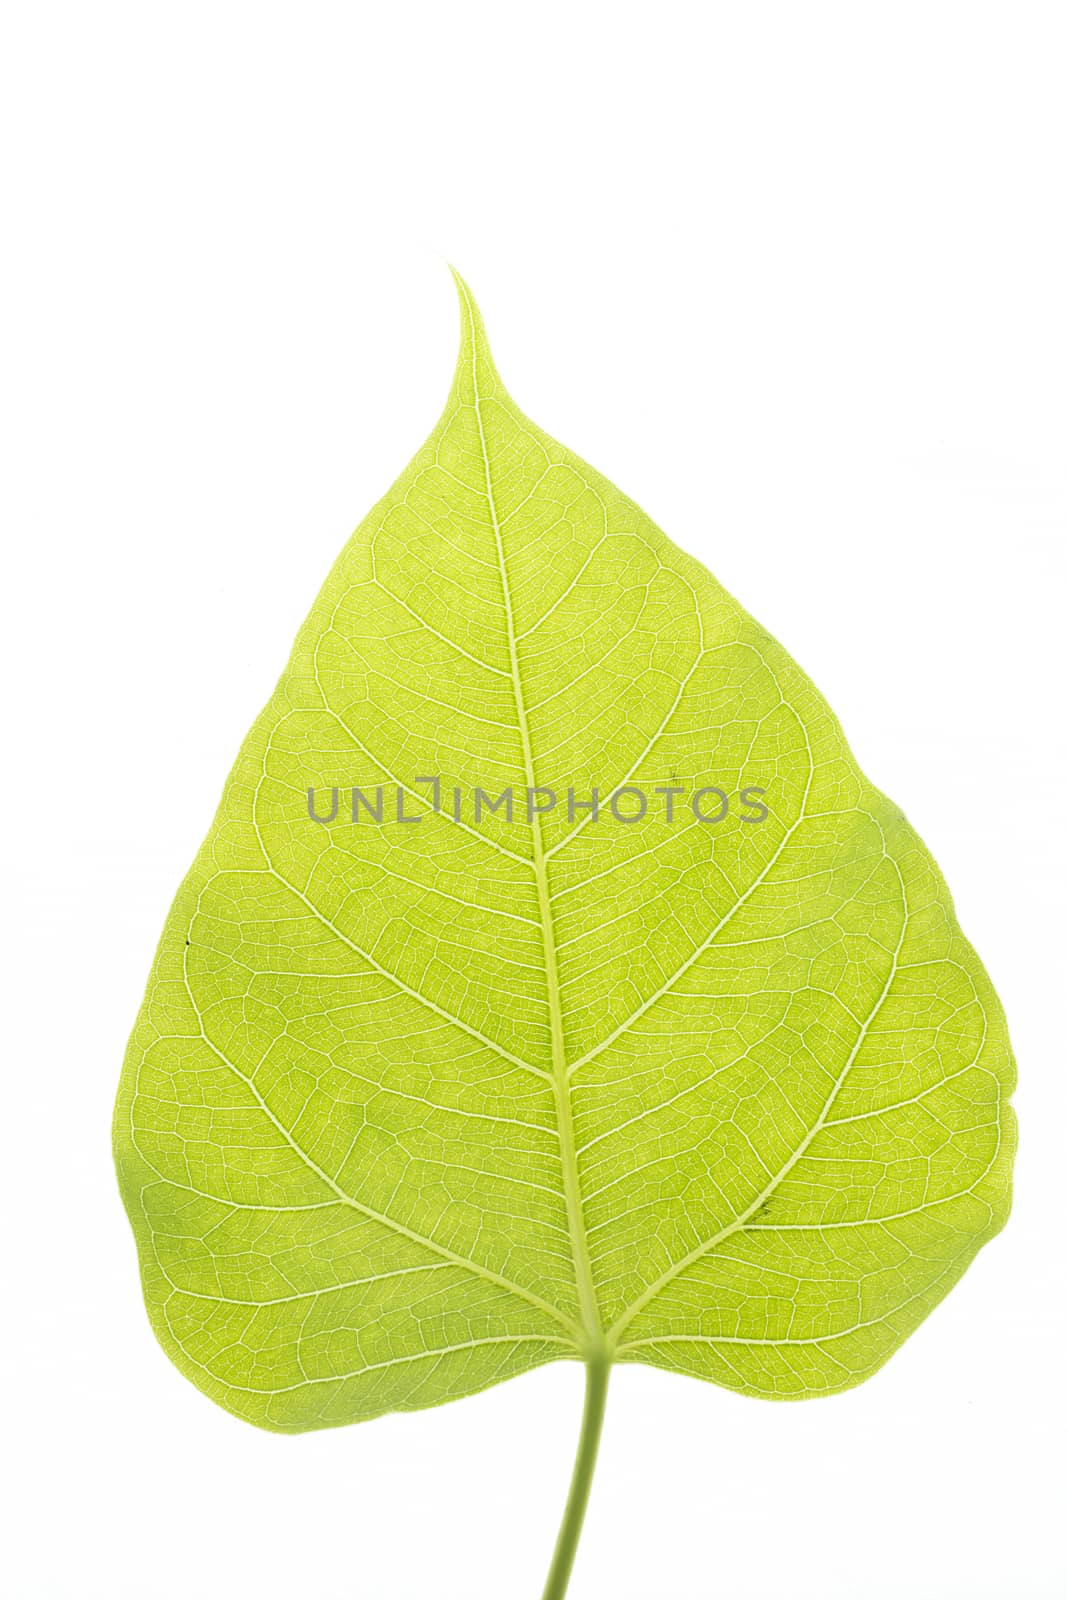 Pho tree leaf is reminiscent of the Buddha and Buddhist temples.